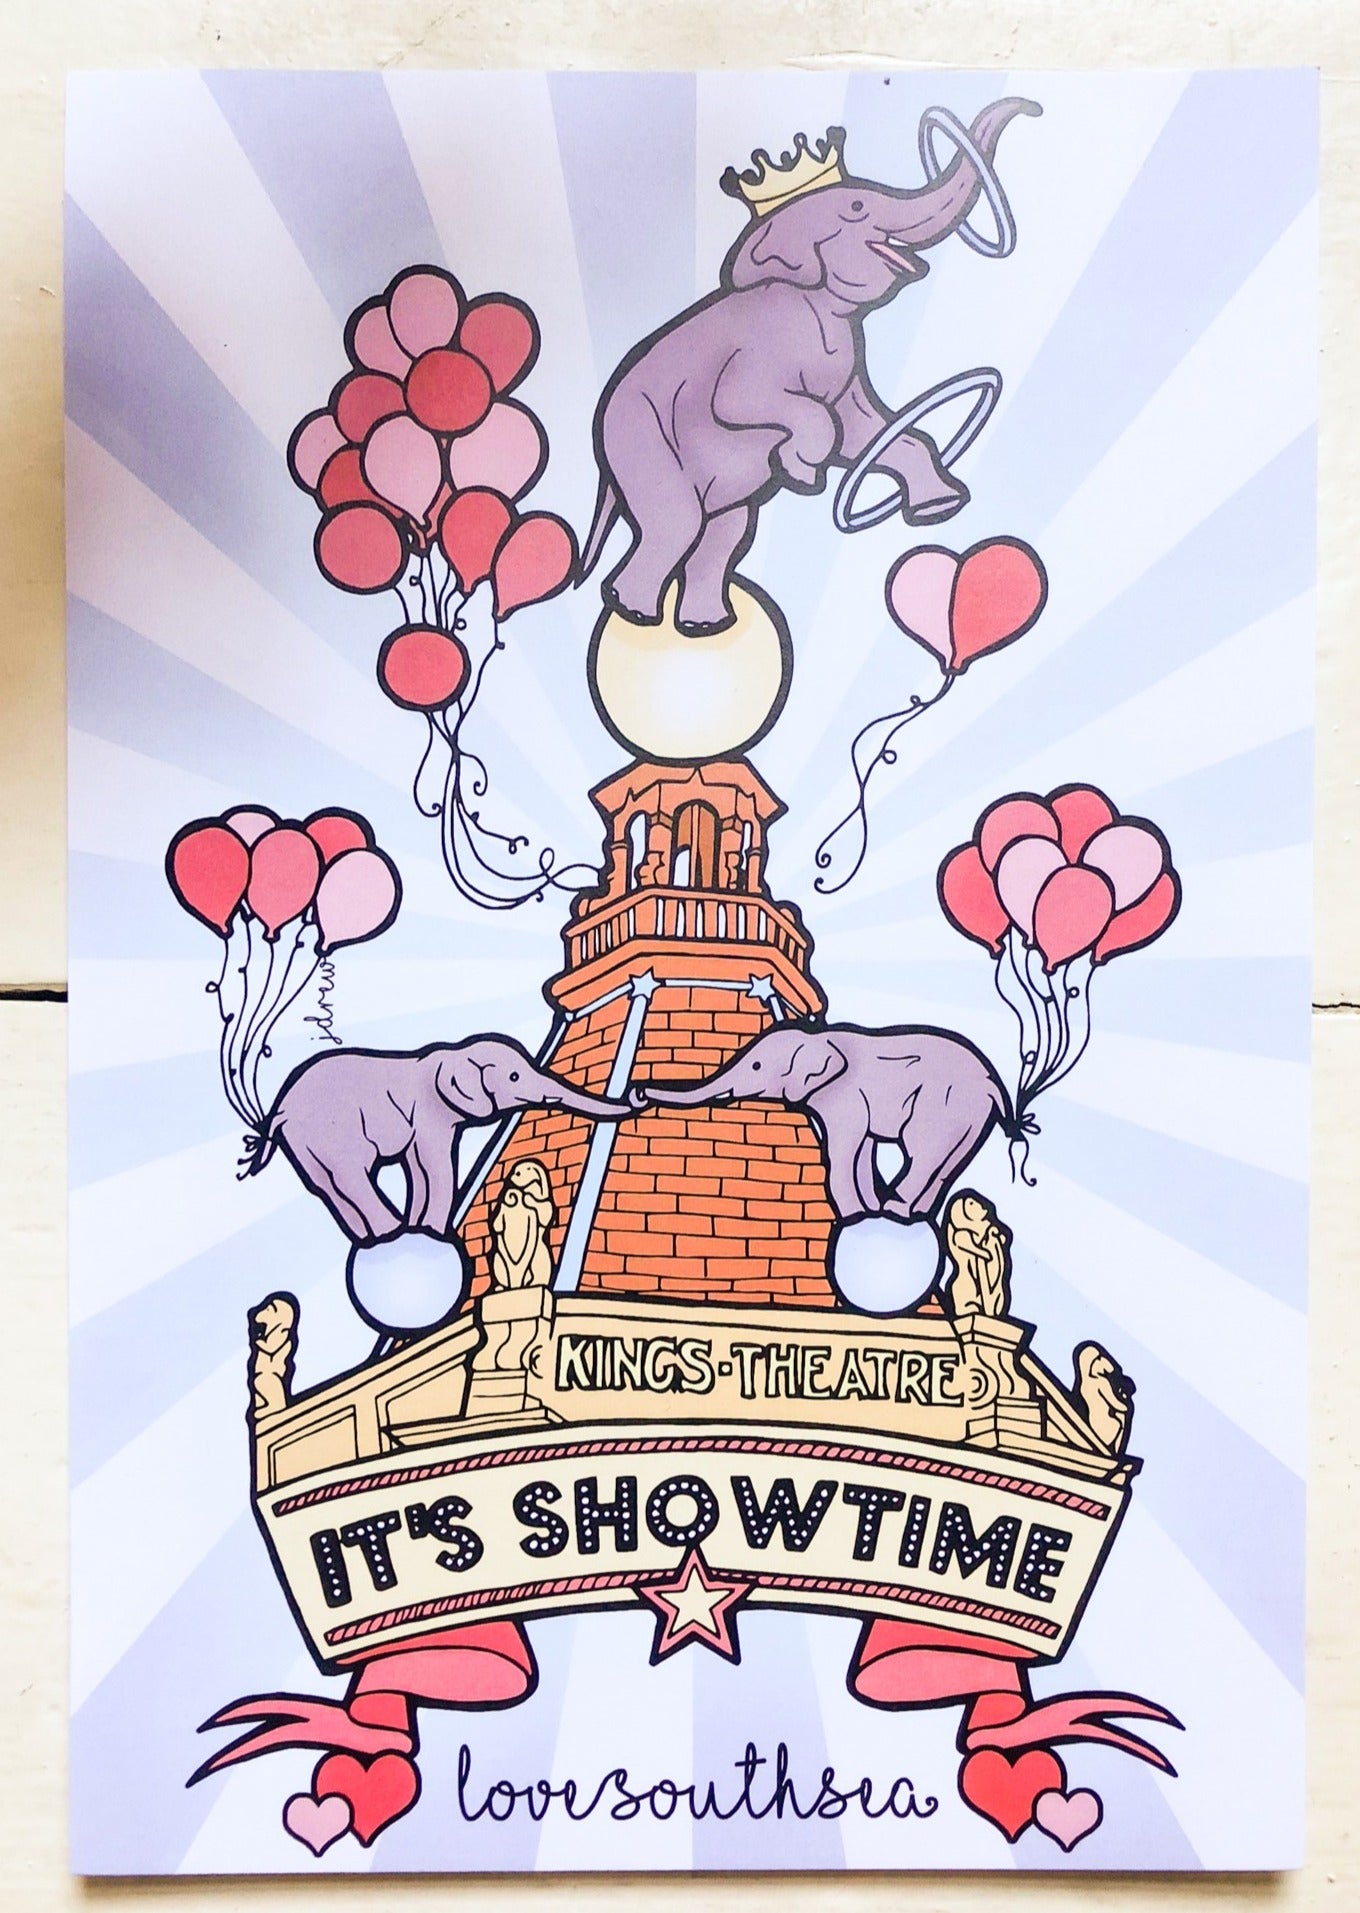 'It's Showtime' at the Kings Theatre Print